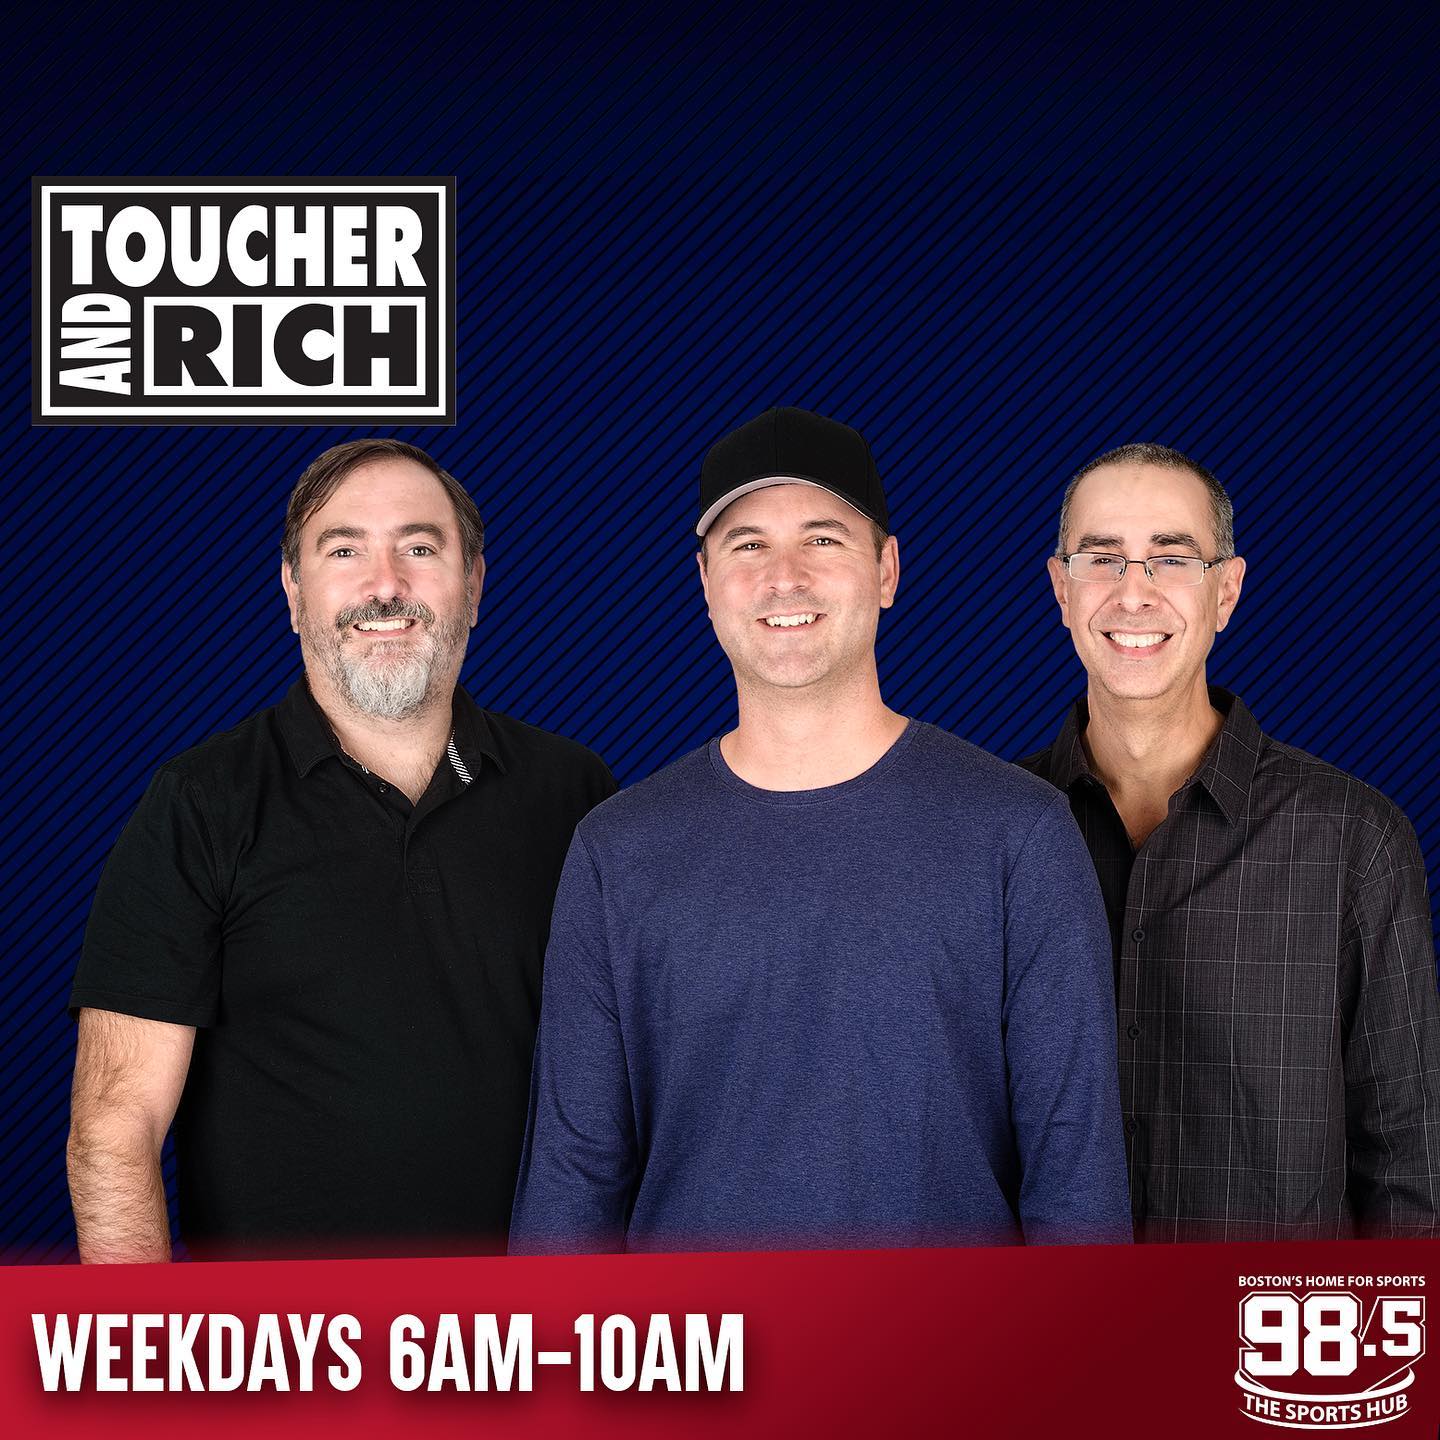 @toucherandrichofficial and @985thesportshub Thanks for having me on this morning to talk a bit about boxing training with a few of the @nhlbruins during the off-season . 

@tommymcinerney